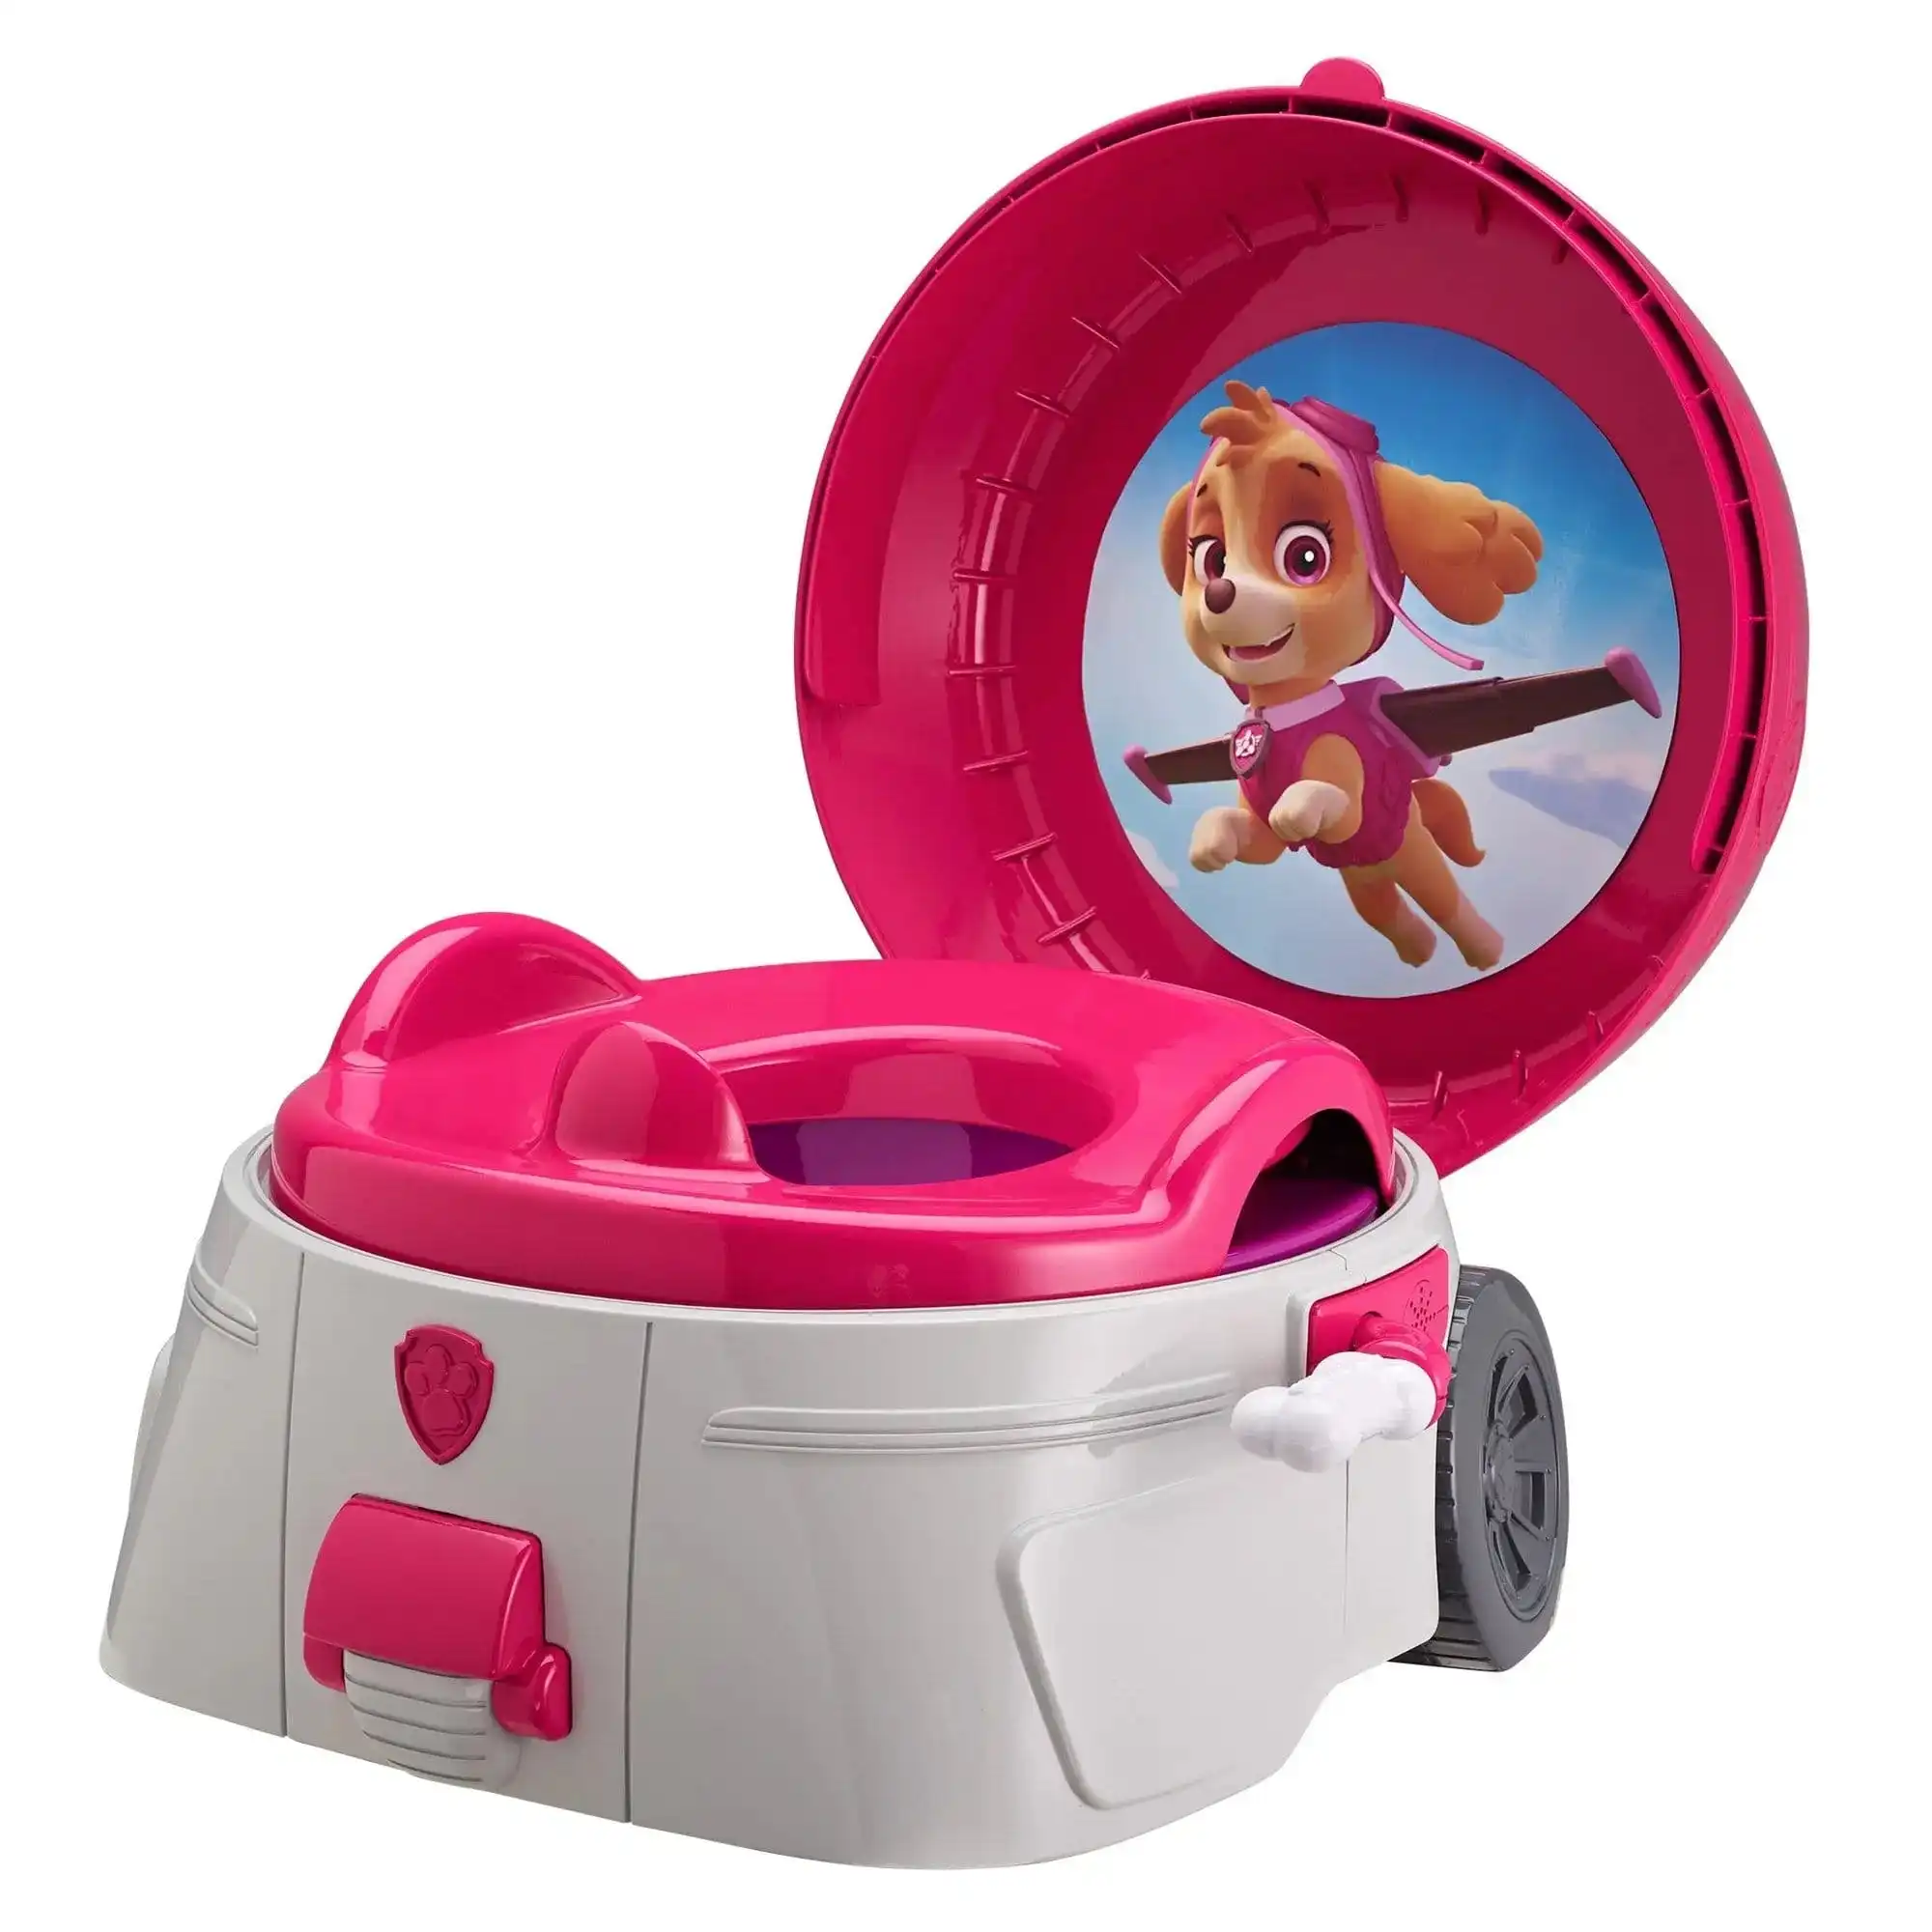 The First years Magical Sounds 3 in 1 Potty Paw Skye